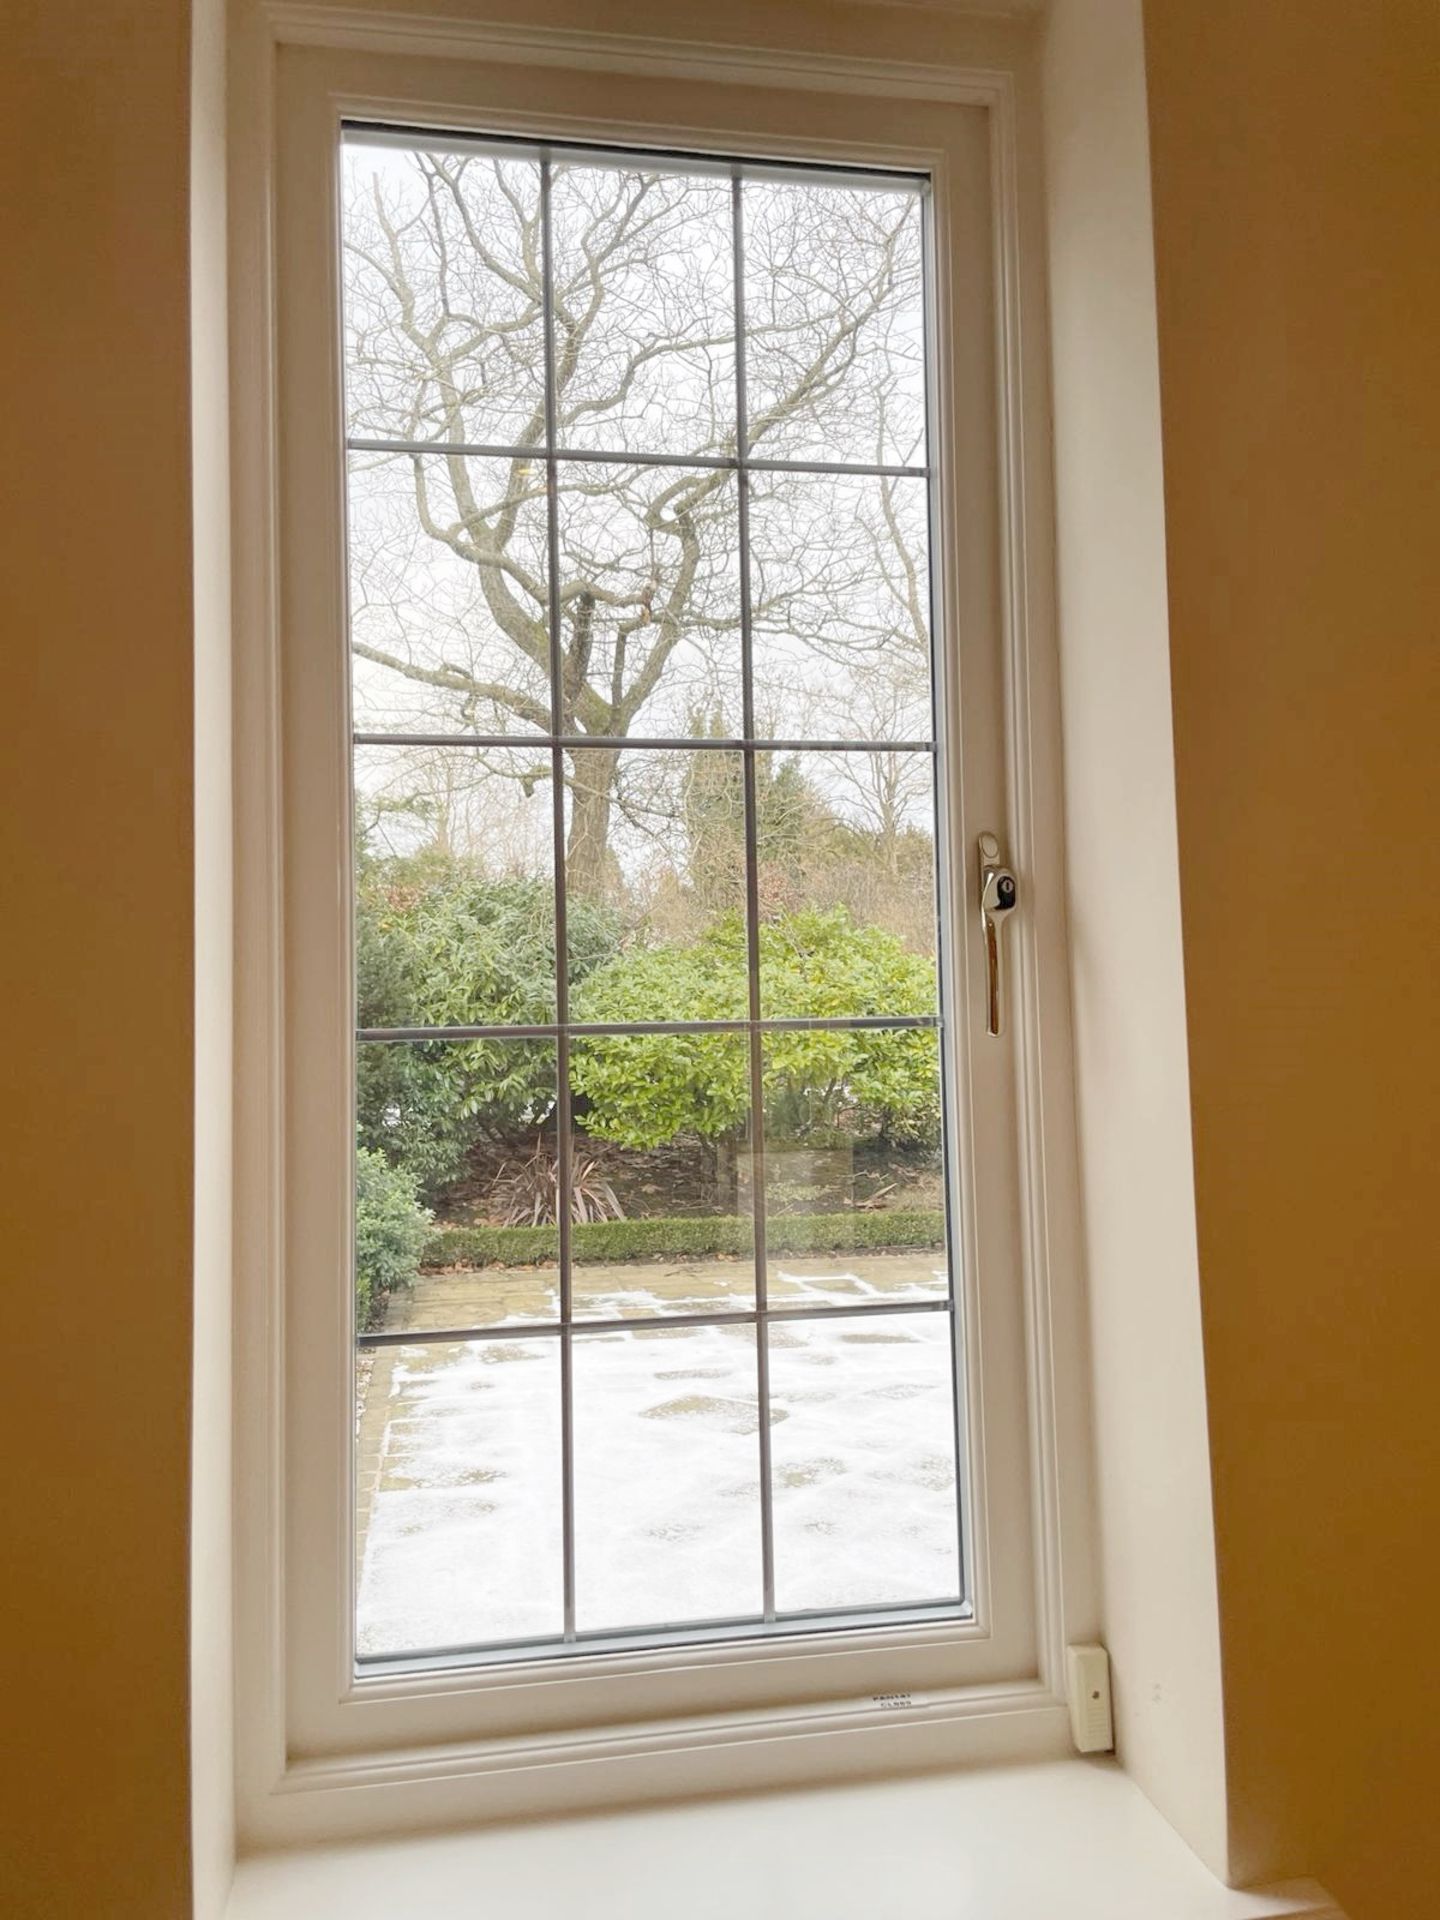 1 x Hardwood Timber Double Glazed & Leaded Window Frame - Ref: PAN147 / M-HALL - CL896 - NO VAT - Image 17 of 18